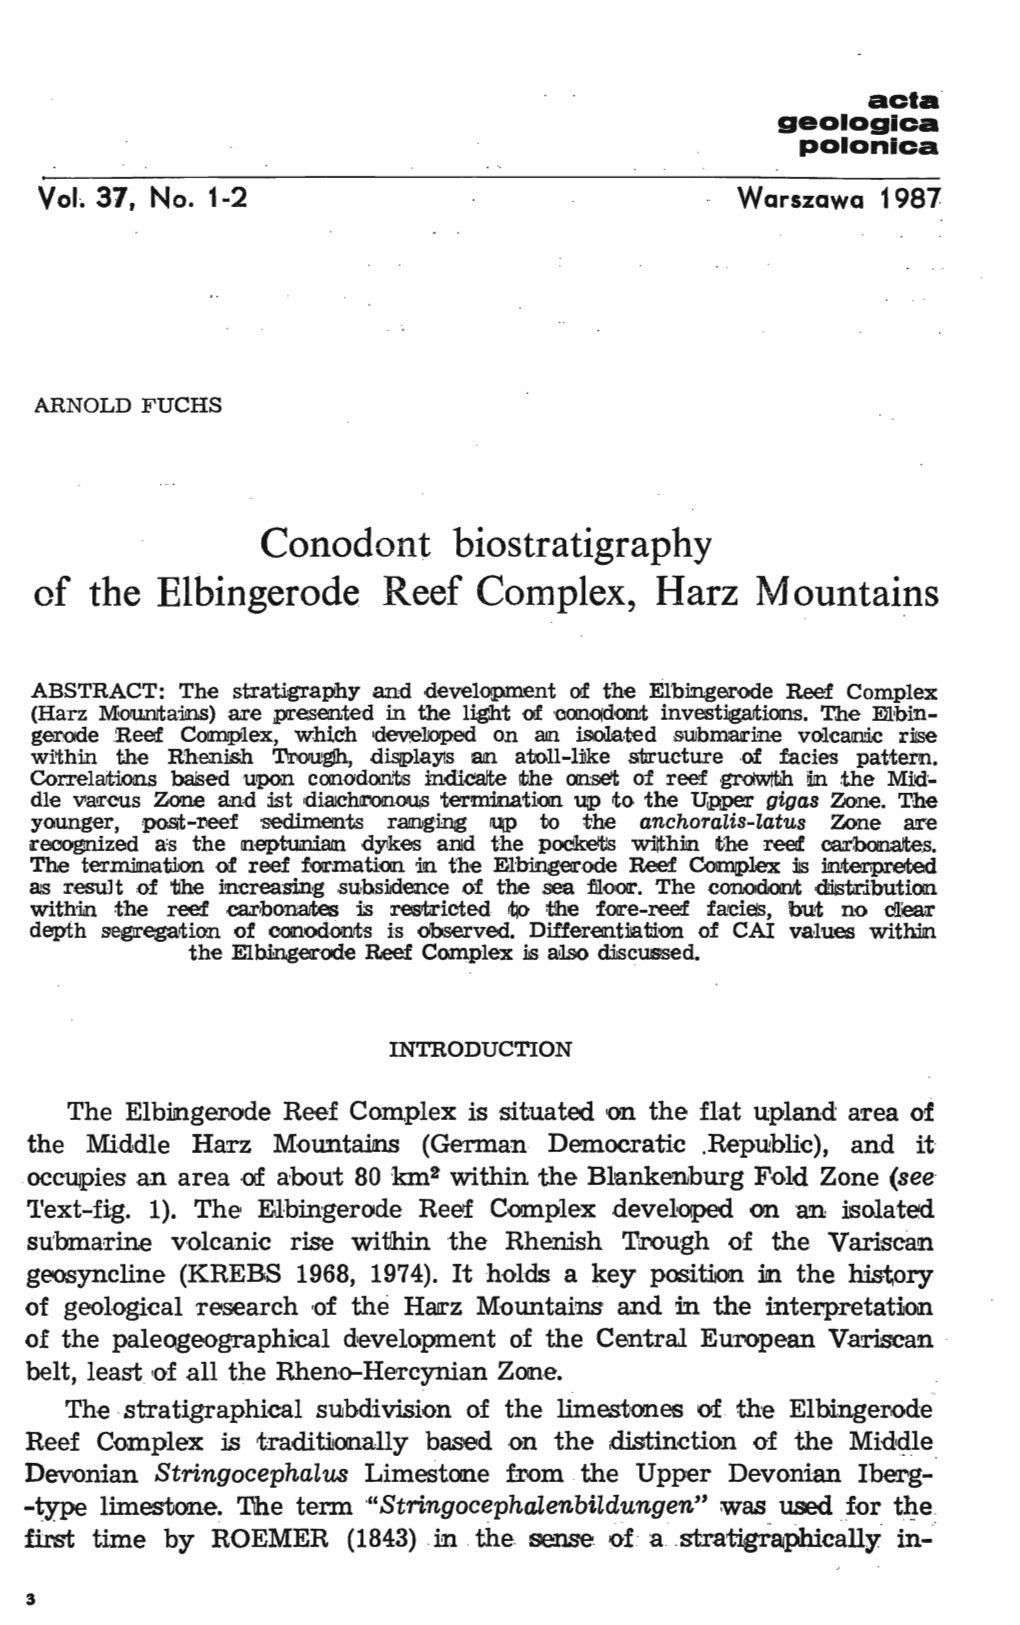 Conodont Biostratigraphy of the Elbingerode Reef Complex, Harz Mountains